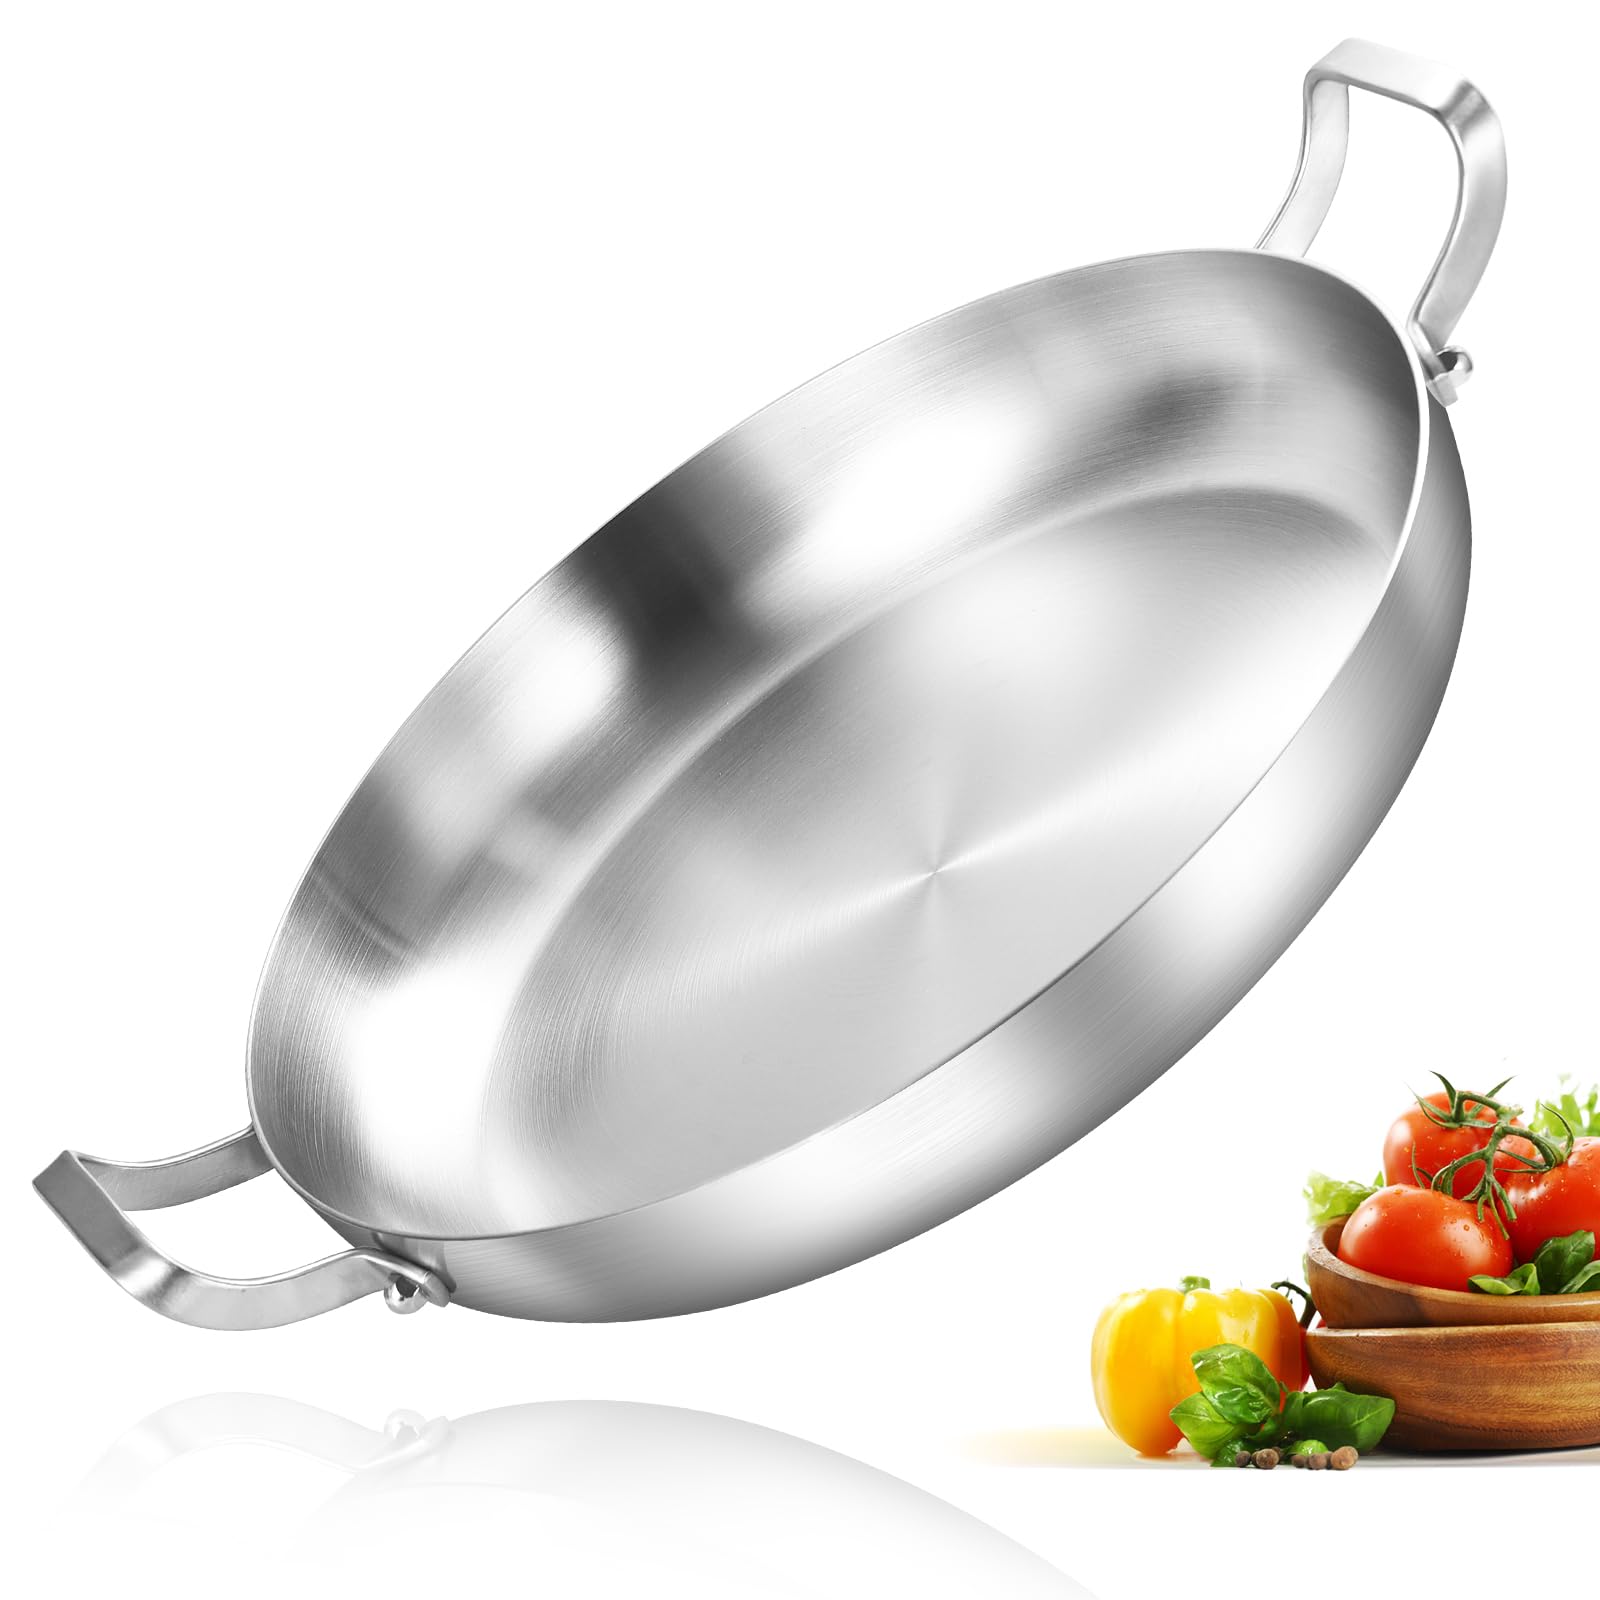 Shiny and incredibly versatile, the Inqibee paella pan is a gem in the kitchen.